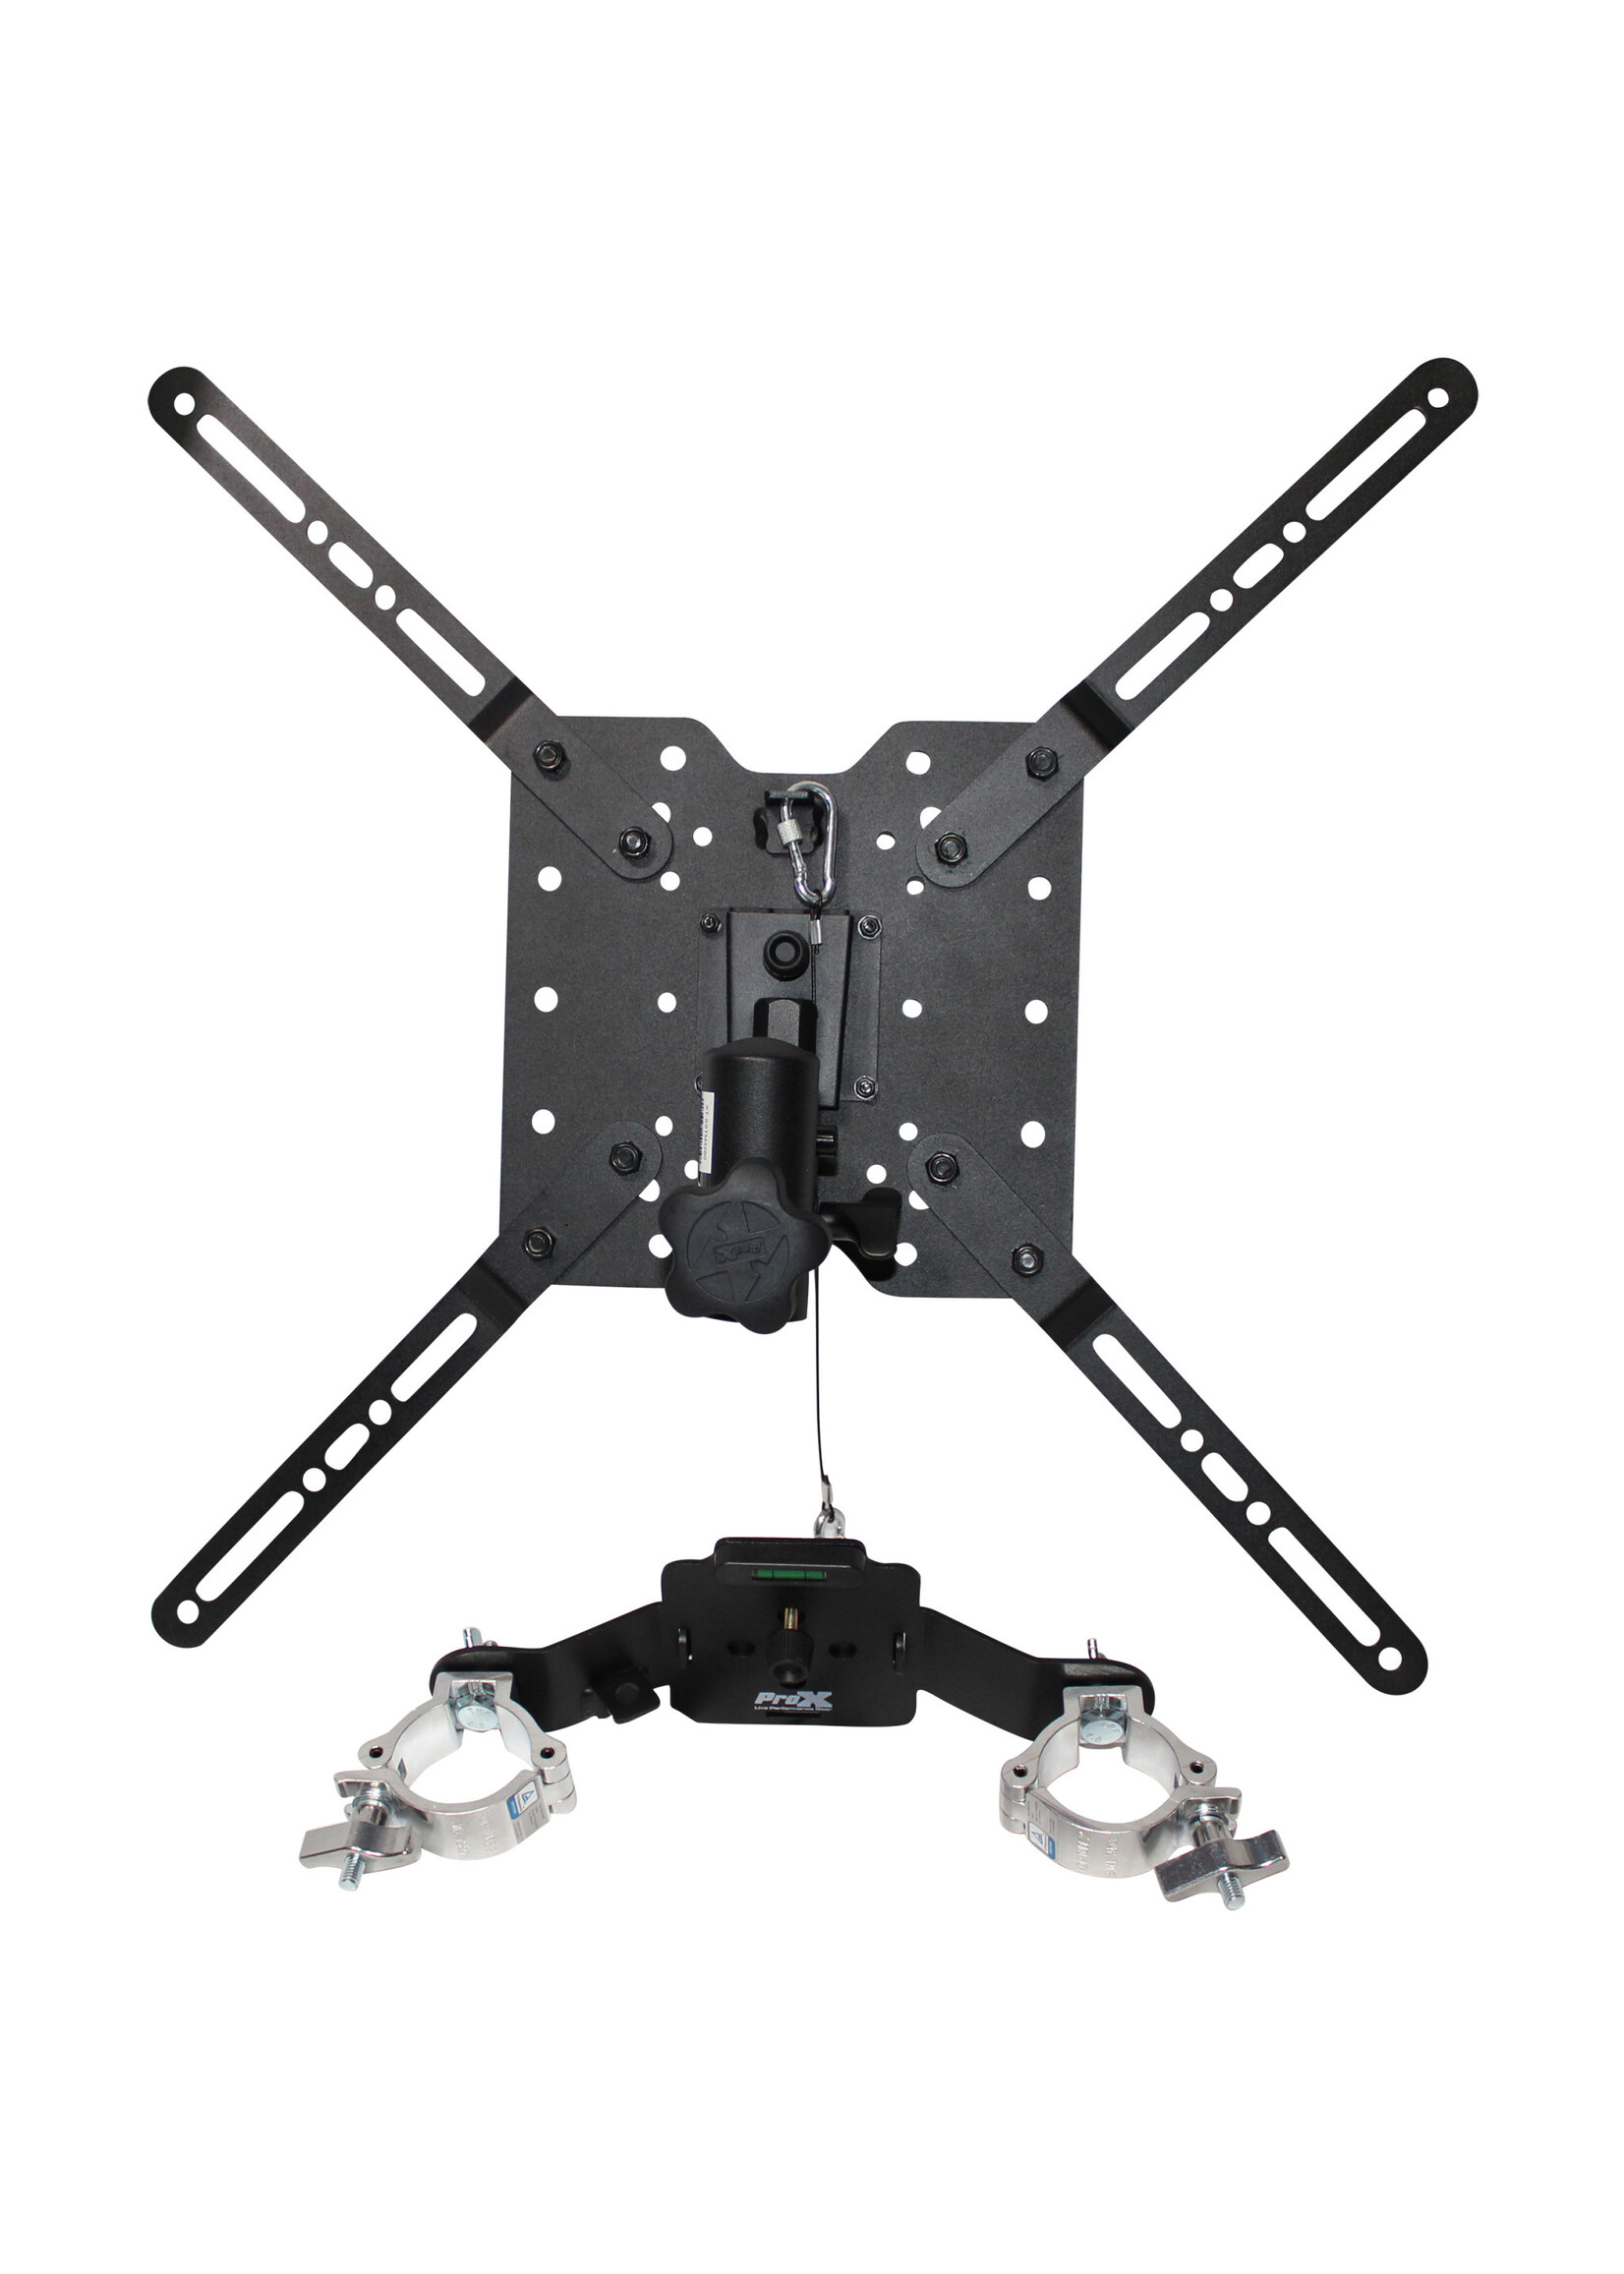 ProX ProX XT-MEDIA MOUNT Universal 32" to 80" TV Bracket Clamp with Vesa Mounting Bracket for F34 F32 12" Bolt Truss or Speaker Stands